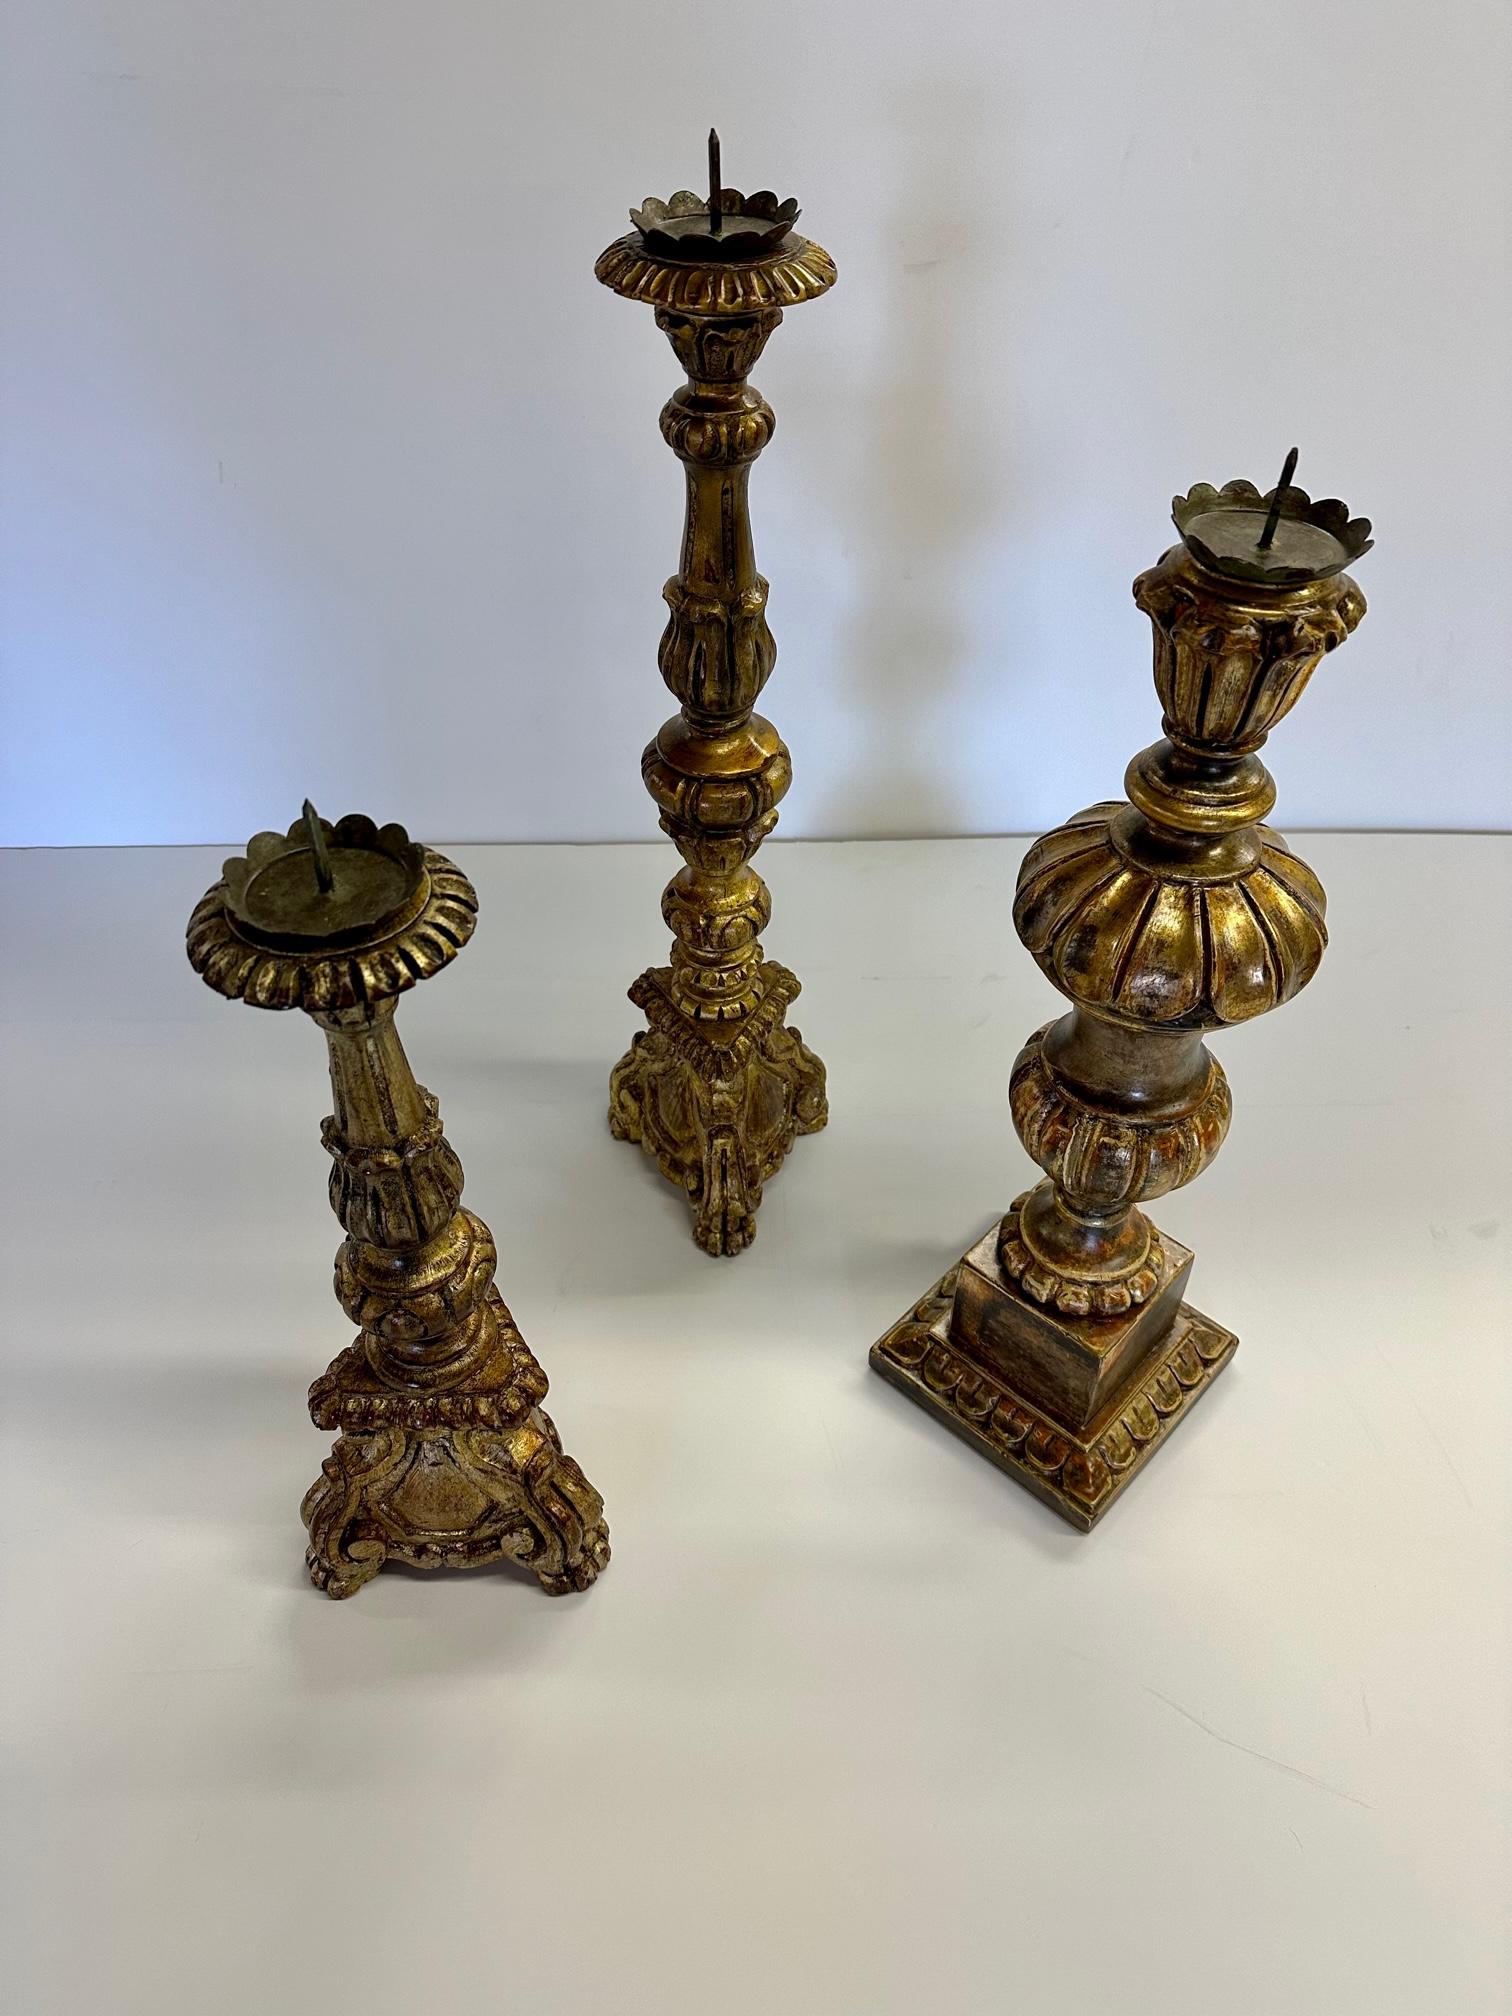 Romantic collection of 3 vintage carved wood and metal gilded candlesticks.
3 sizes are: 6.5 base 23.5 H
 6.5 base 25 H
6.75 base 20 H.